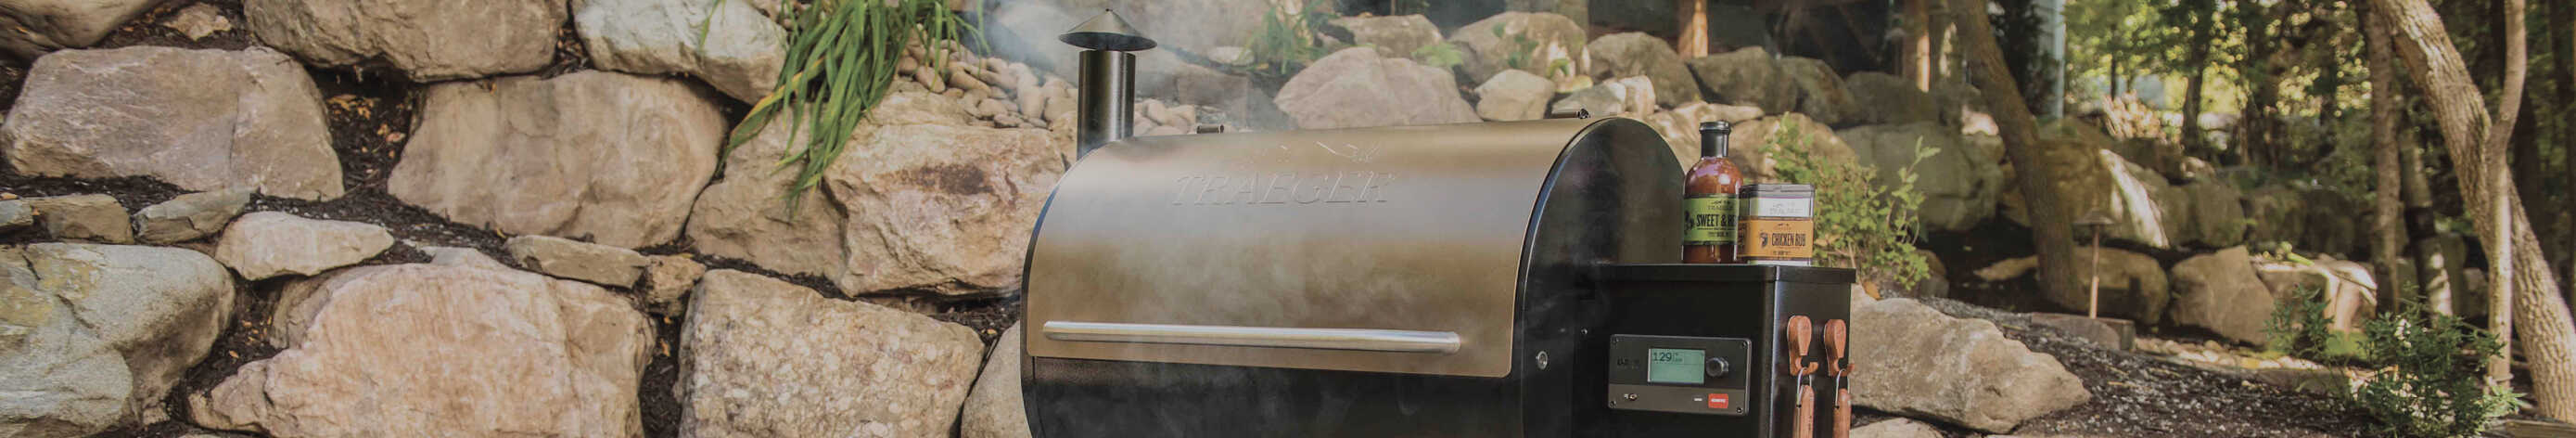 new trager smokers grills for sale near lloydminster canada